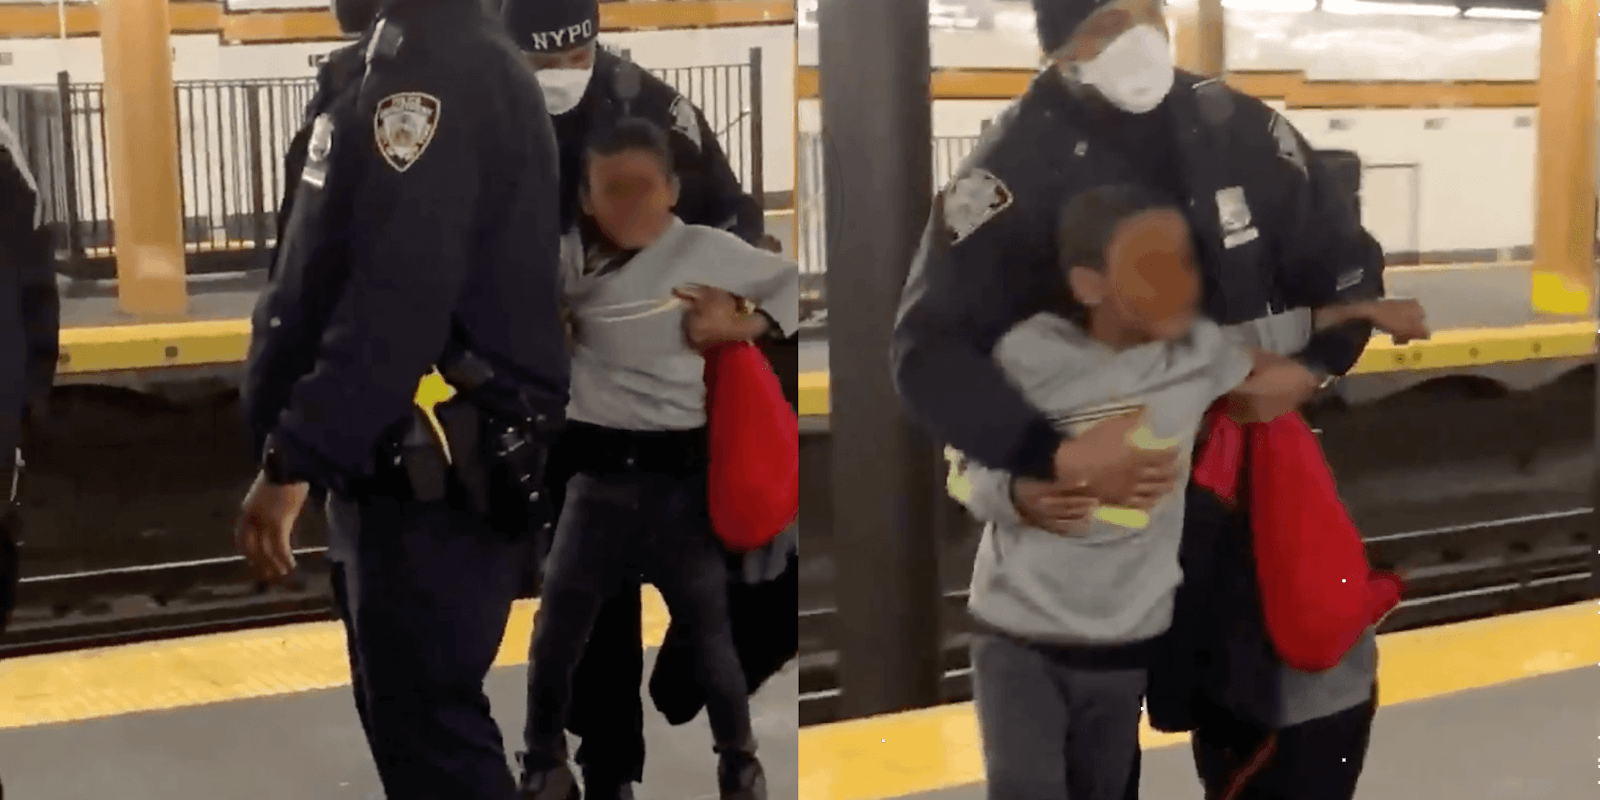 Screenshots show a NYPD cop forcefully restraining a young boy